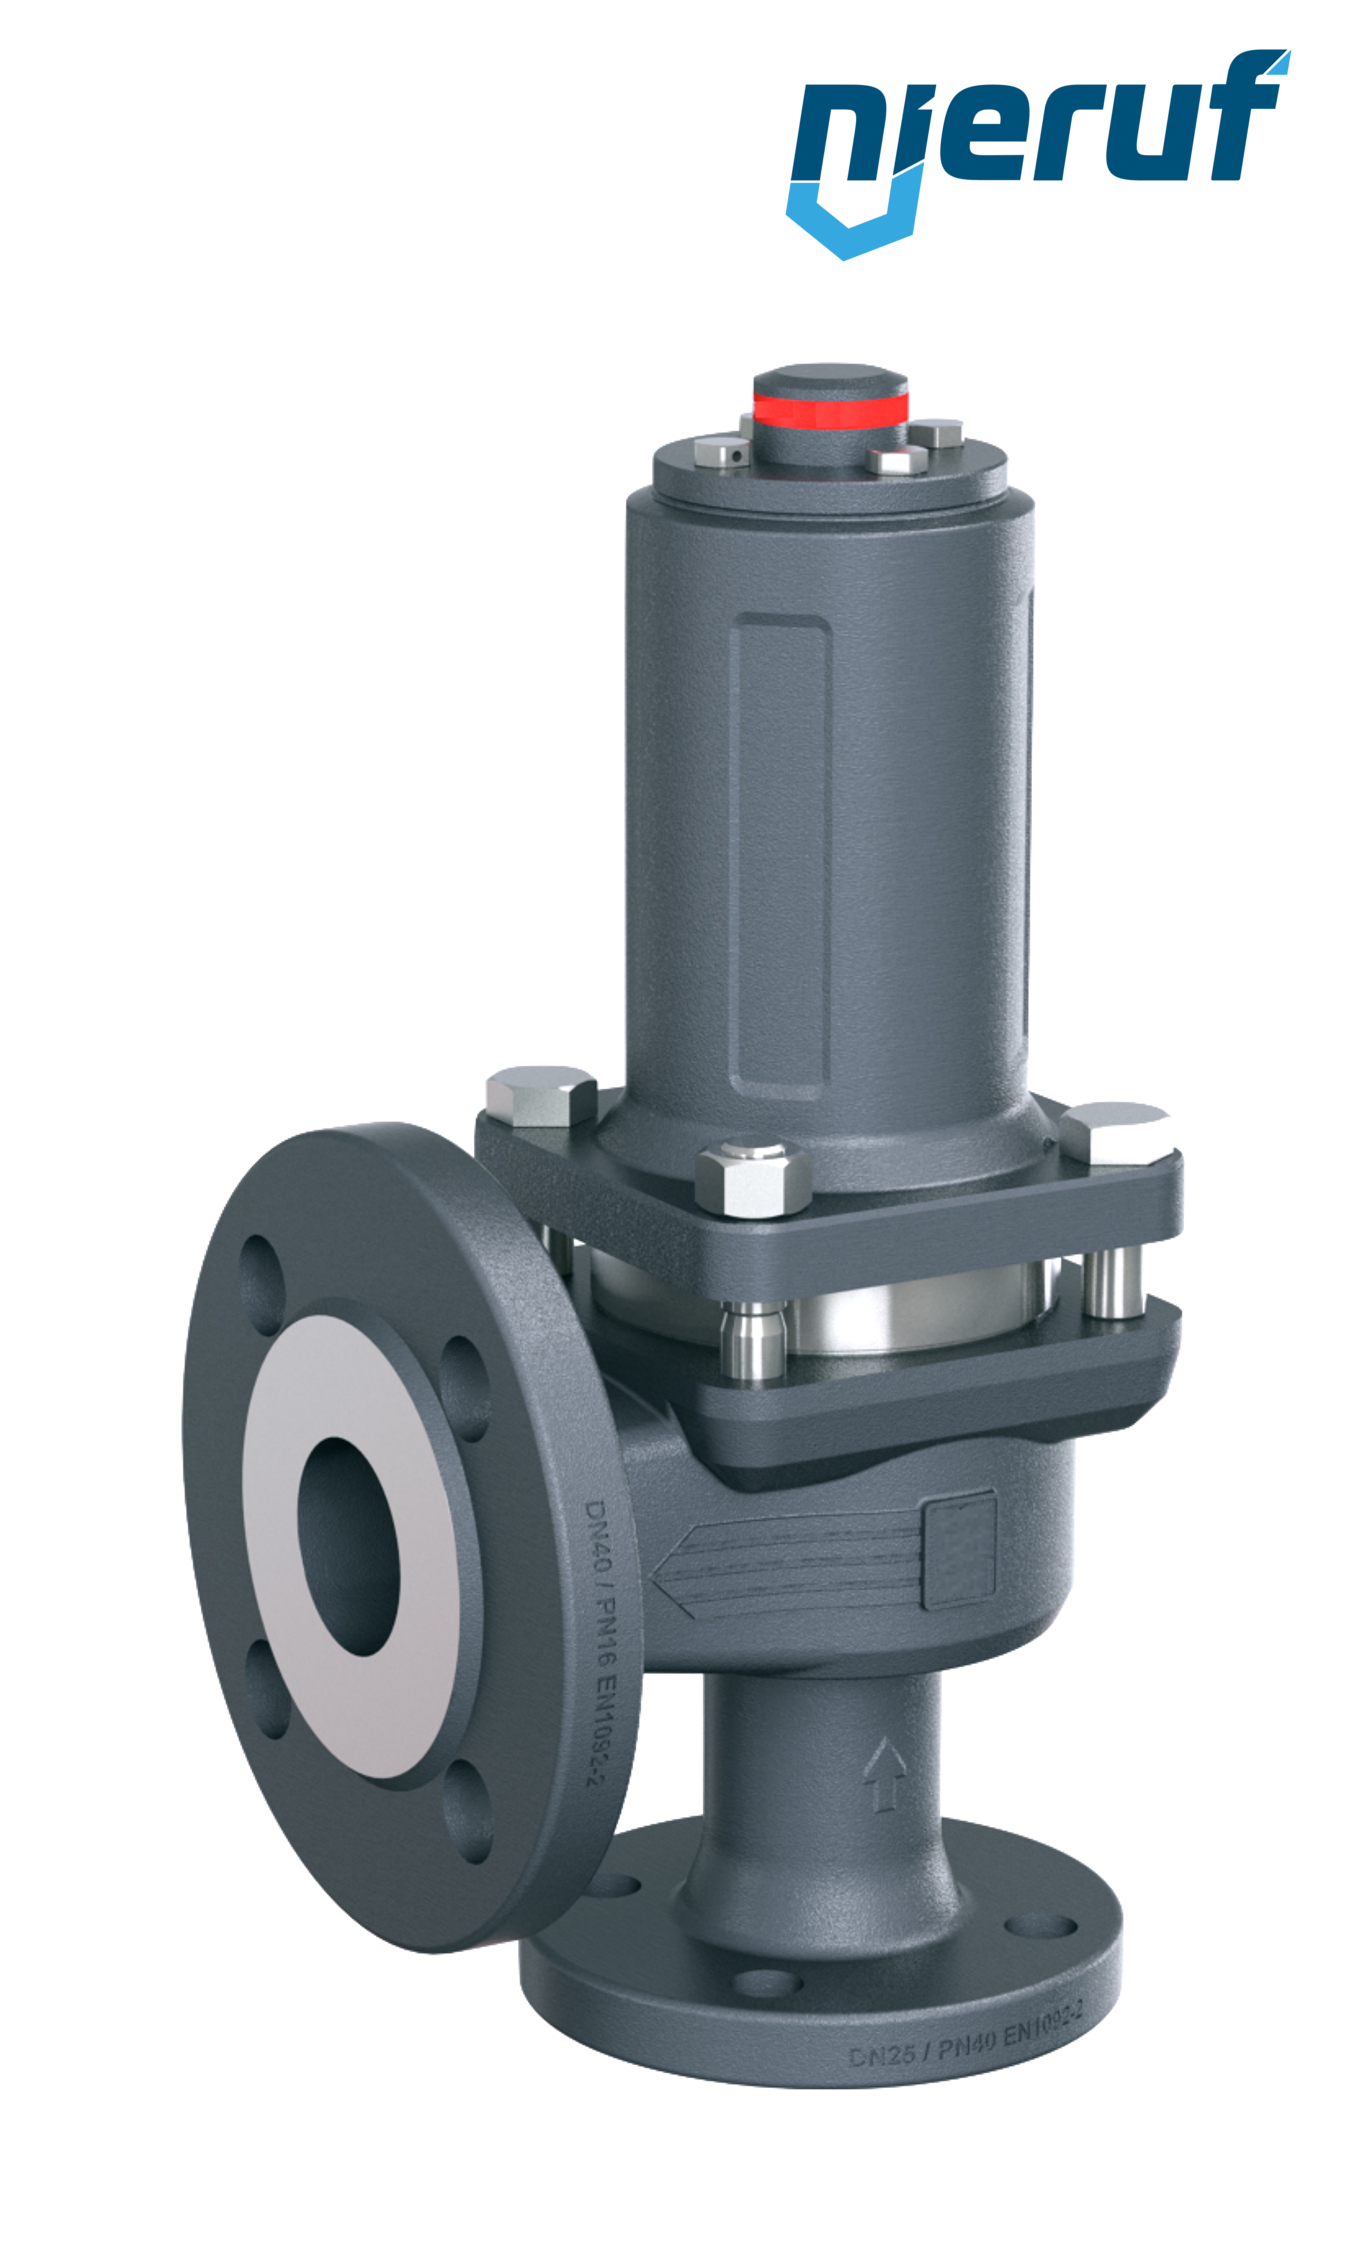 flange-safety valve DN25/DN40 SF06, gastight bonnet EPDM, without lifting device